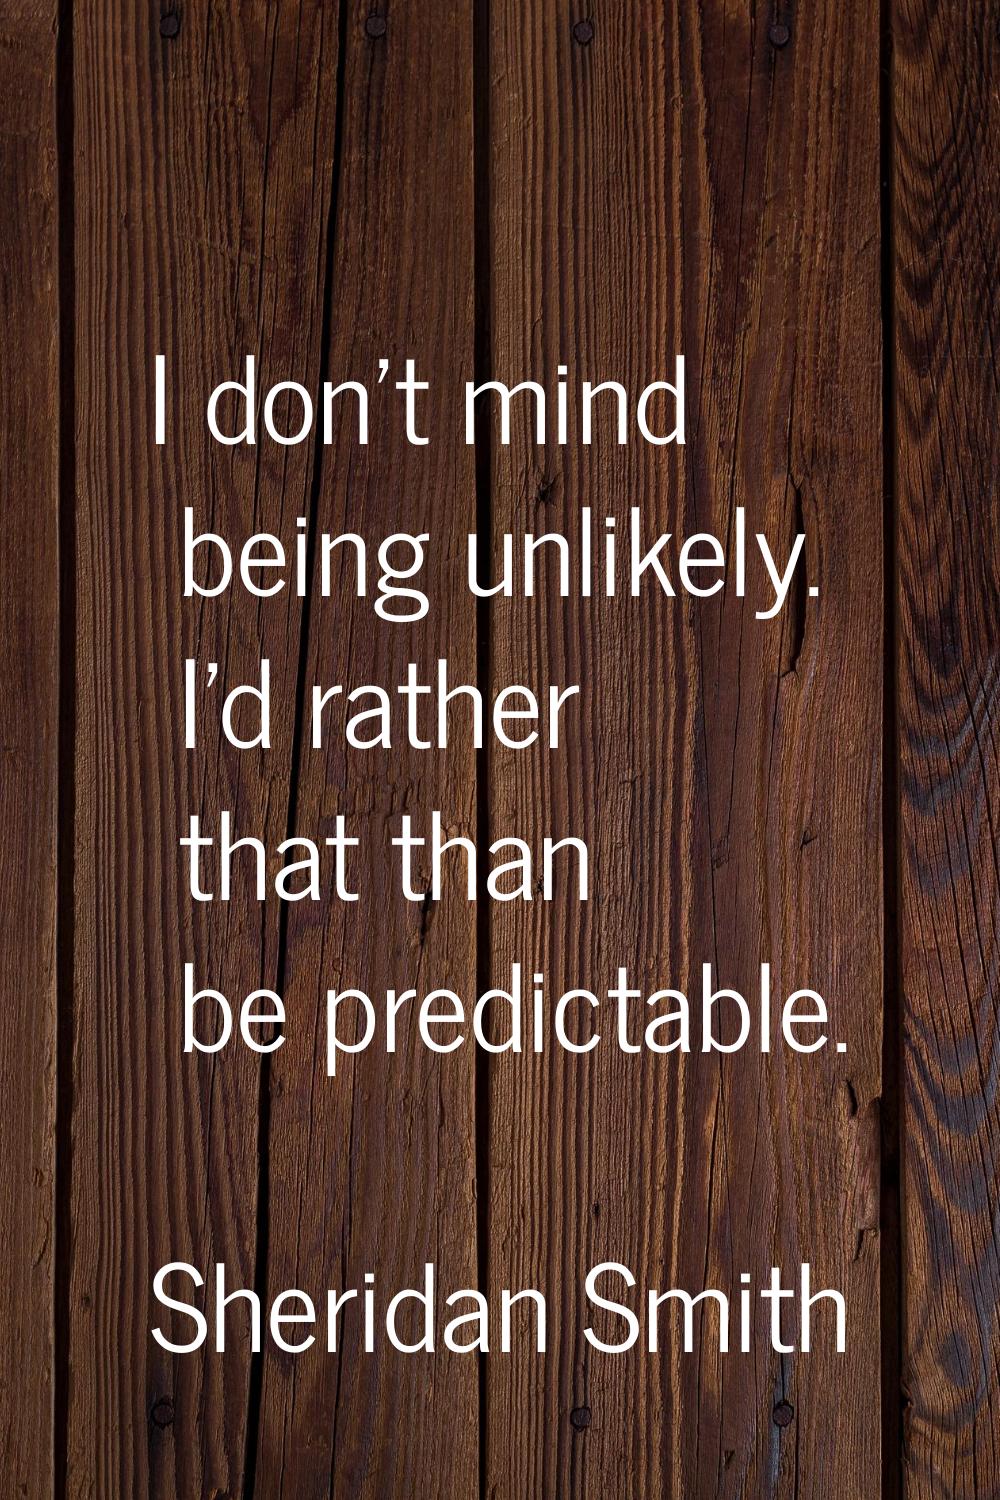 I don't mind being unlikely. I'd rather that than be predictable.